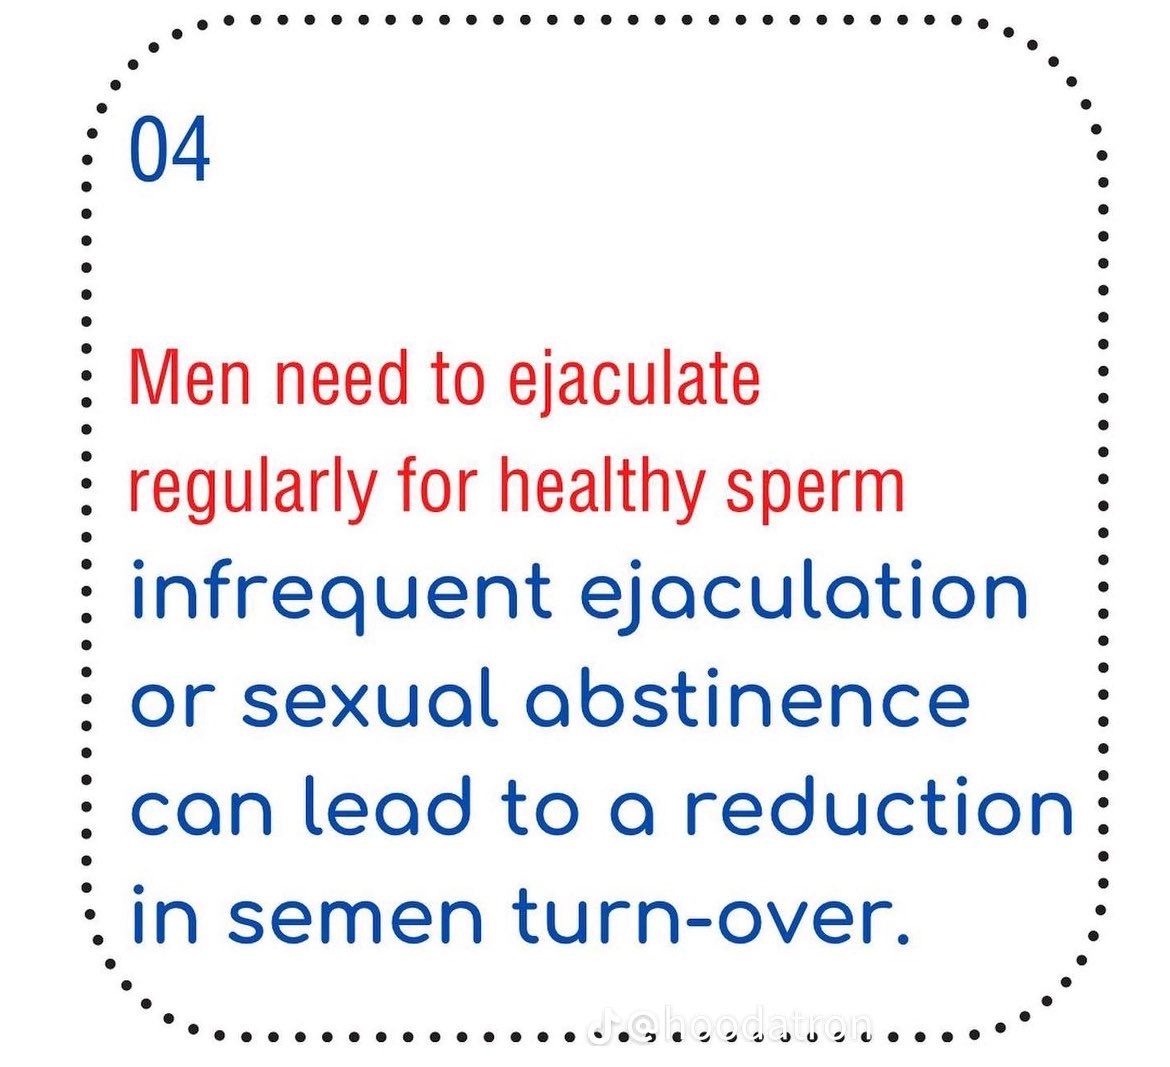 8 facts about the Semen